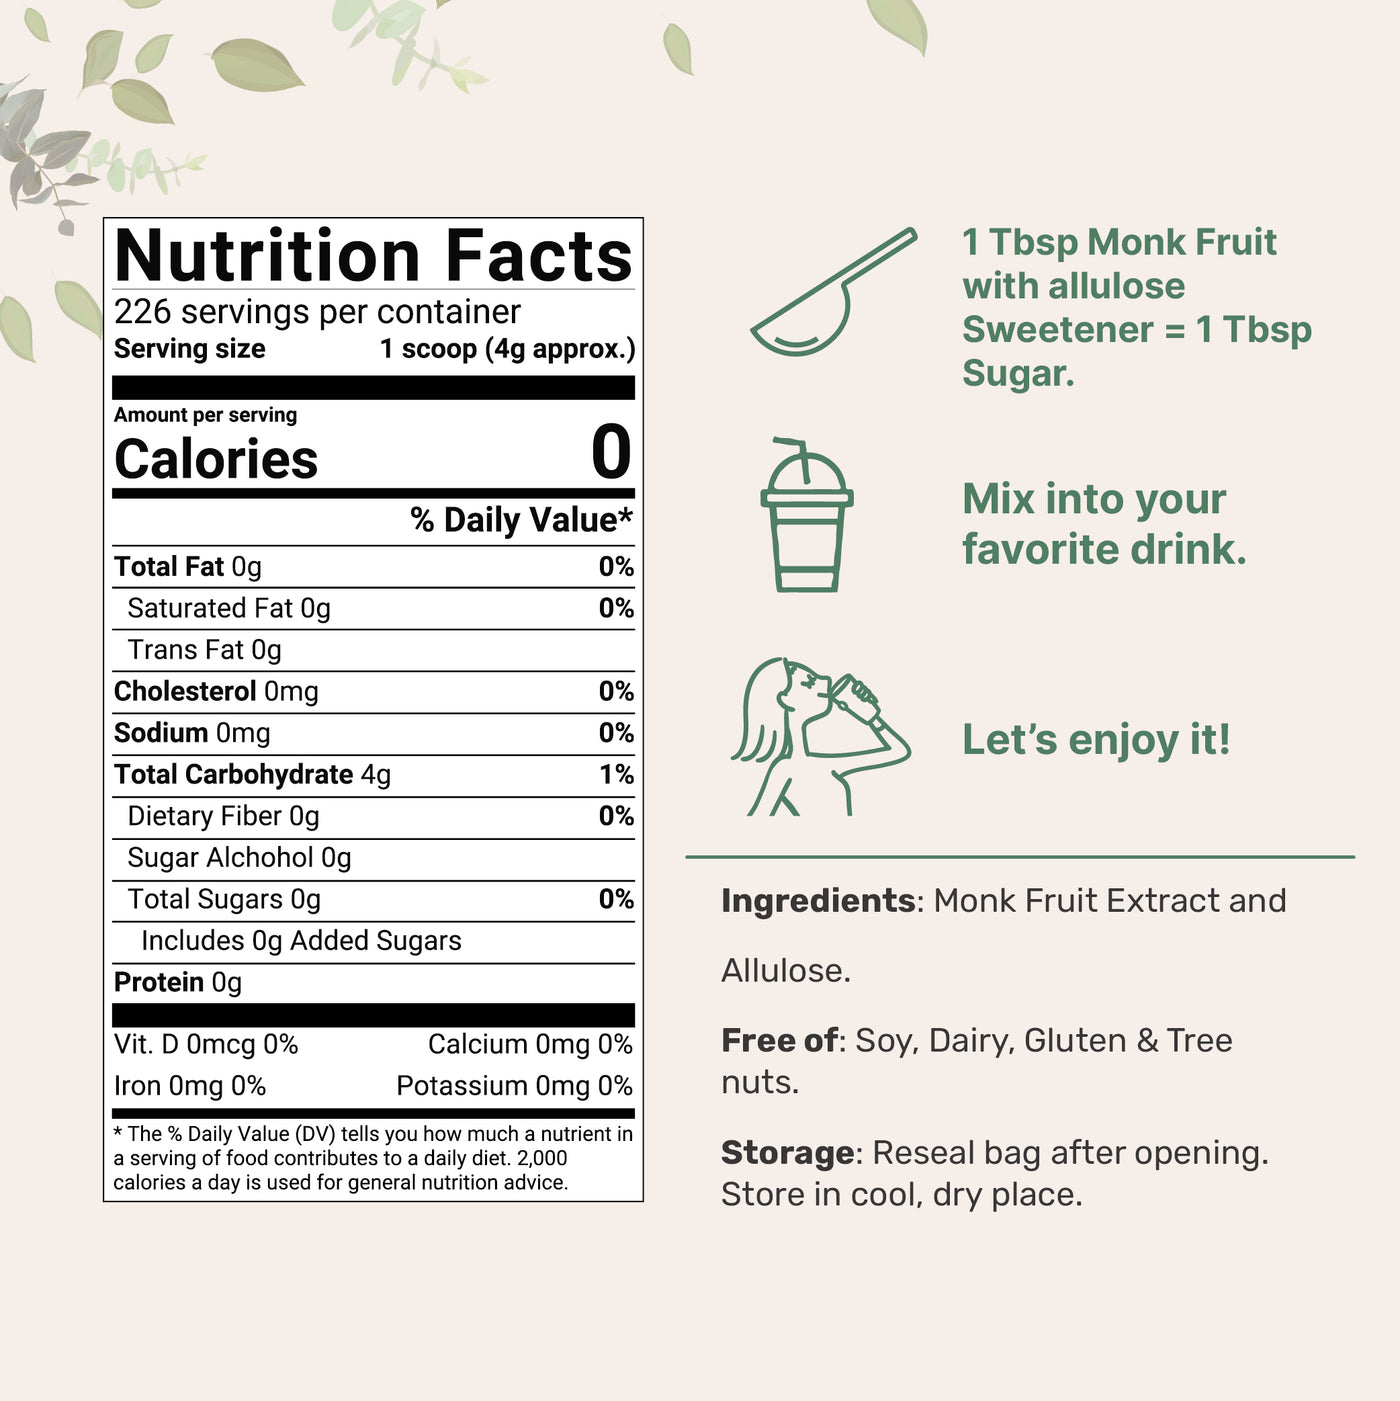 Monk Fruit Sweetener with Allulose Nutrition Facts